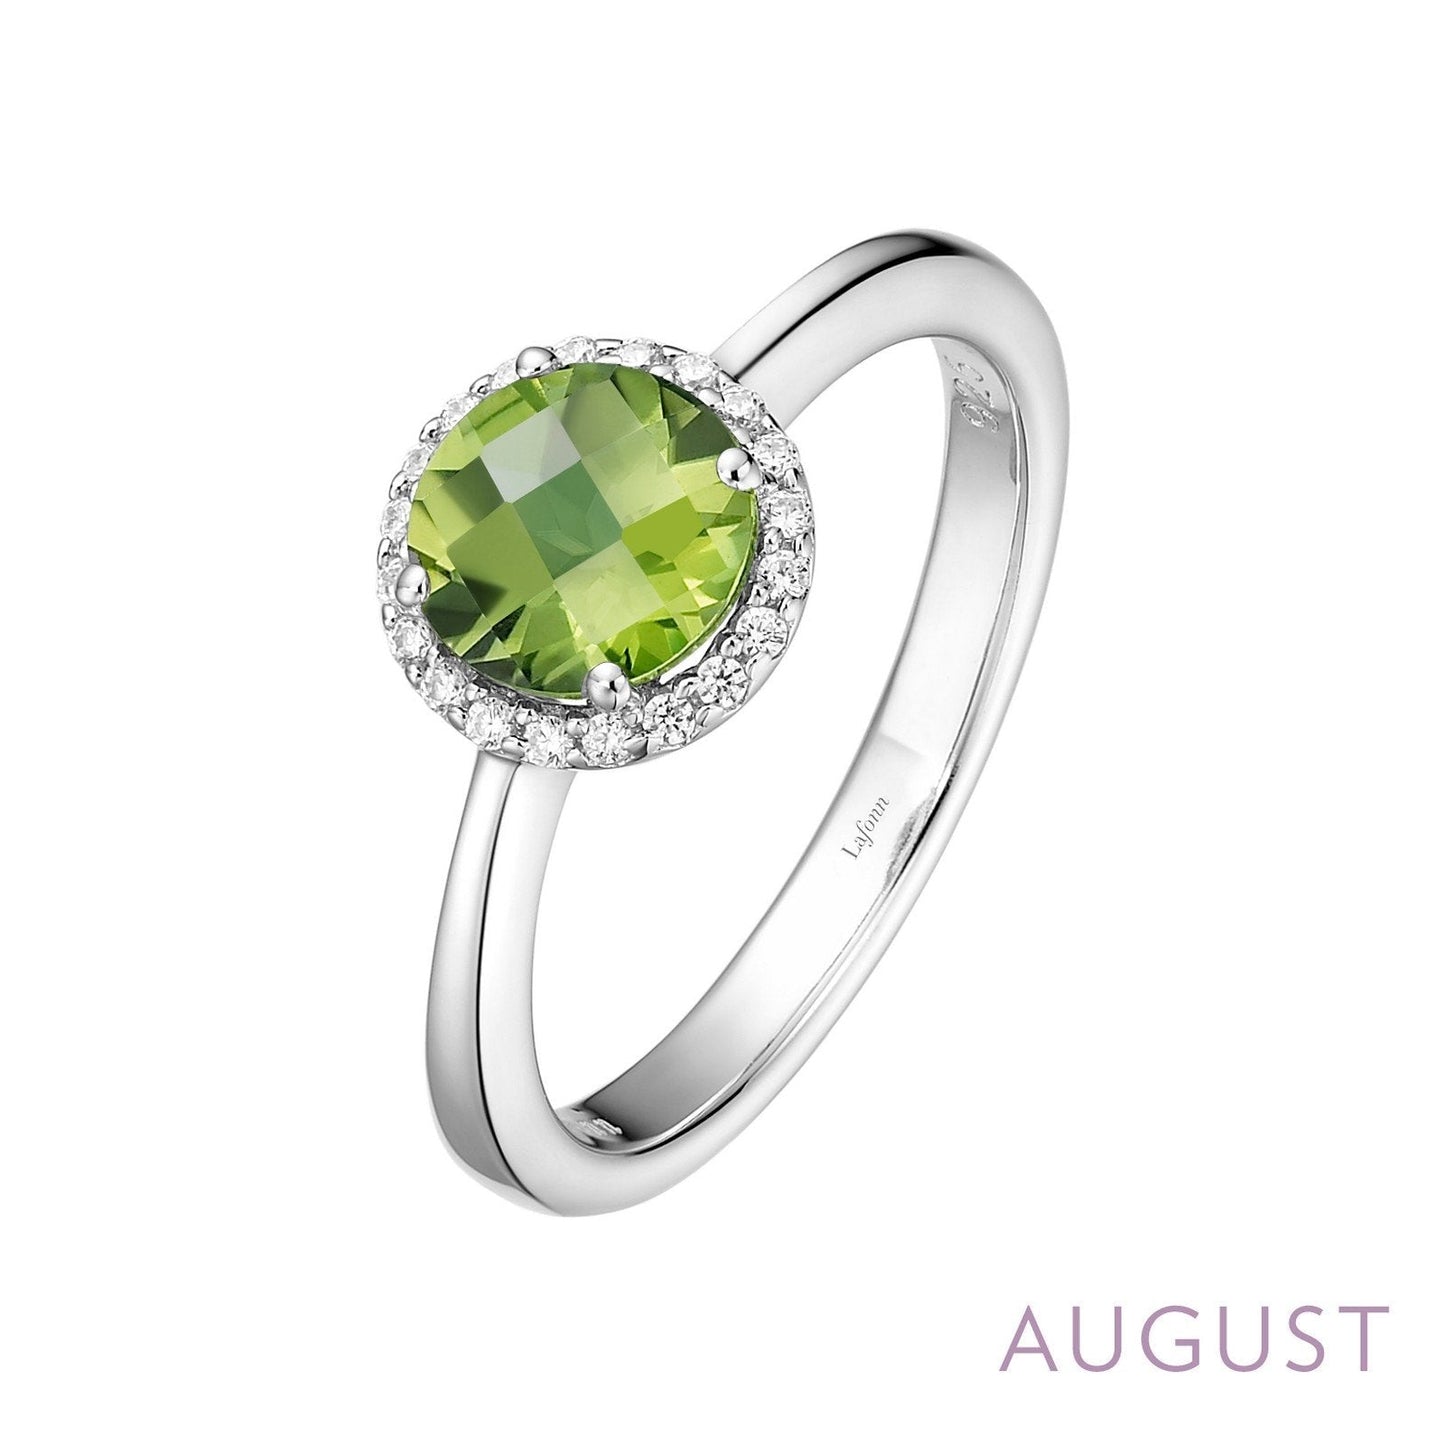 Lafonn August Birthstone Ring AUGUST RINGS Size 6 Platinum Appx CTW: 1.05 cts. Peridot Appx 0.85 cts.  Lassaire simulated diamonds: 0.20 cts. CTS 